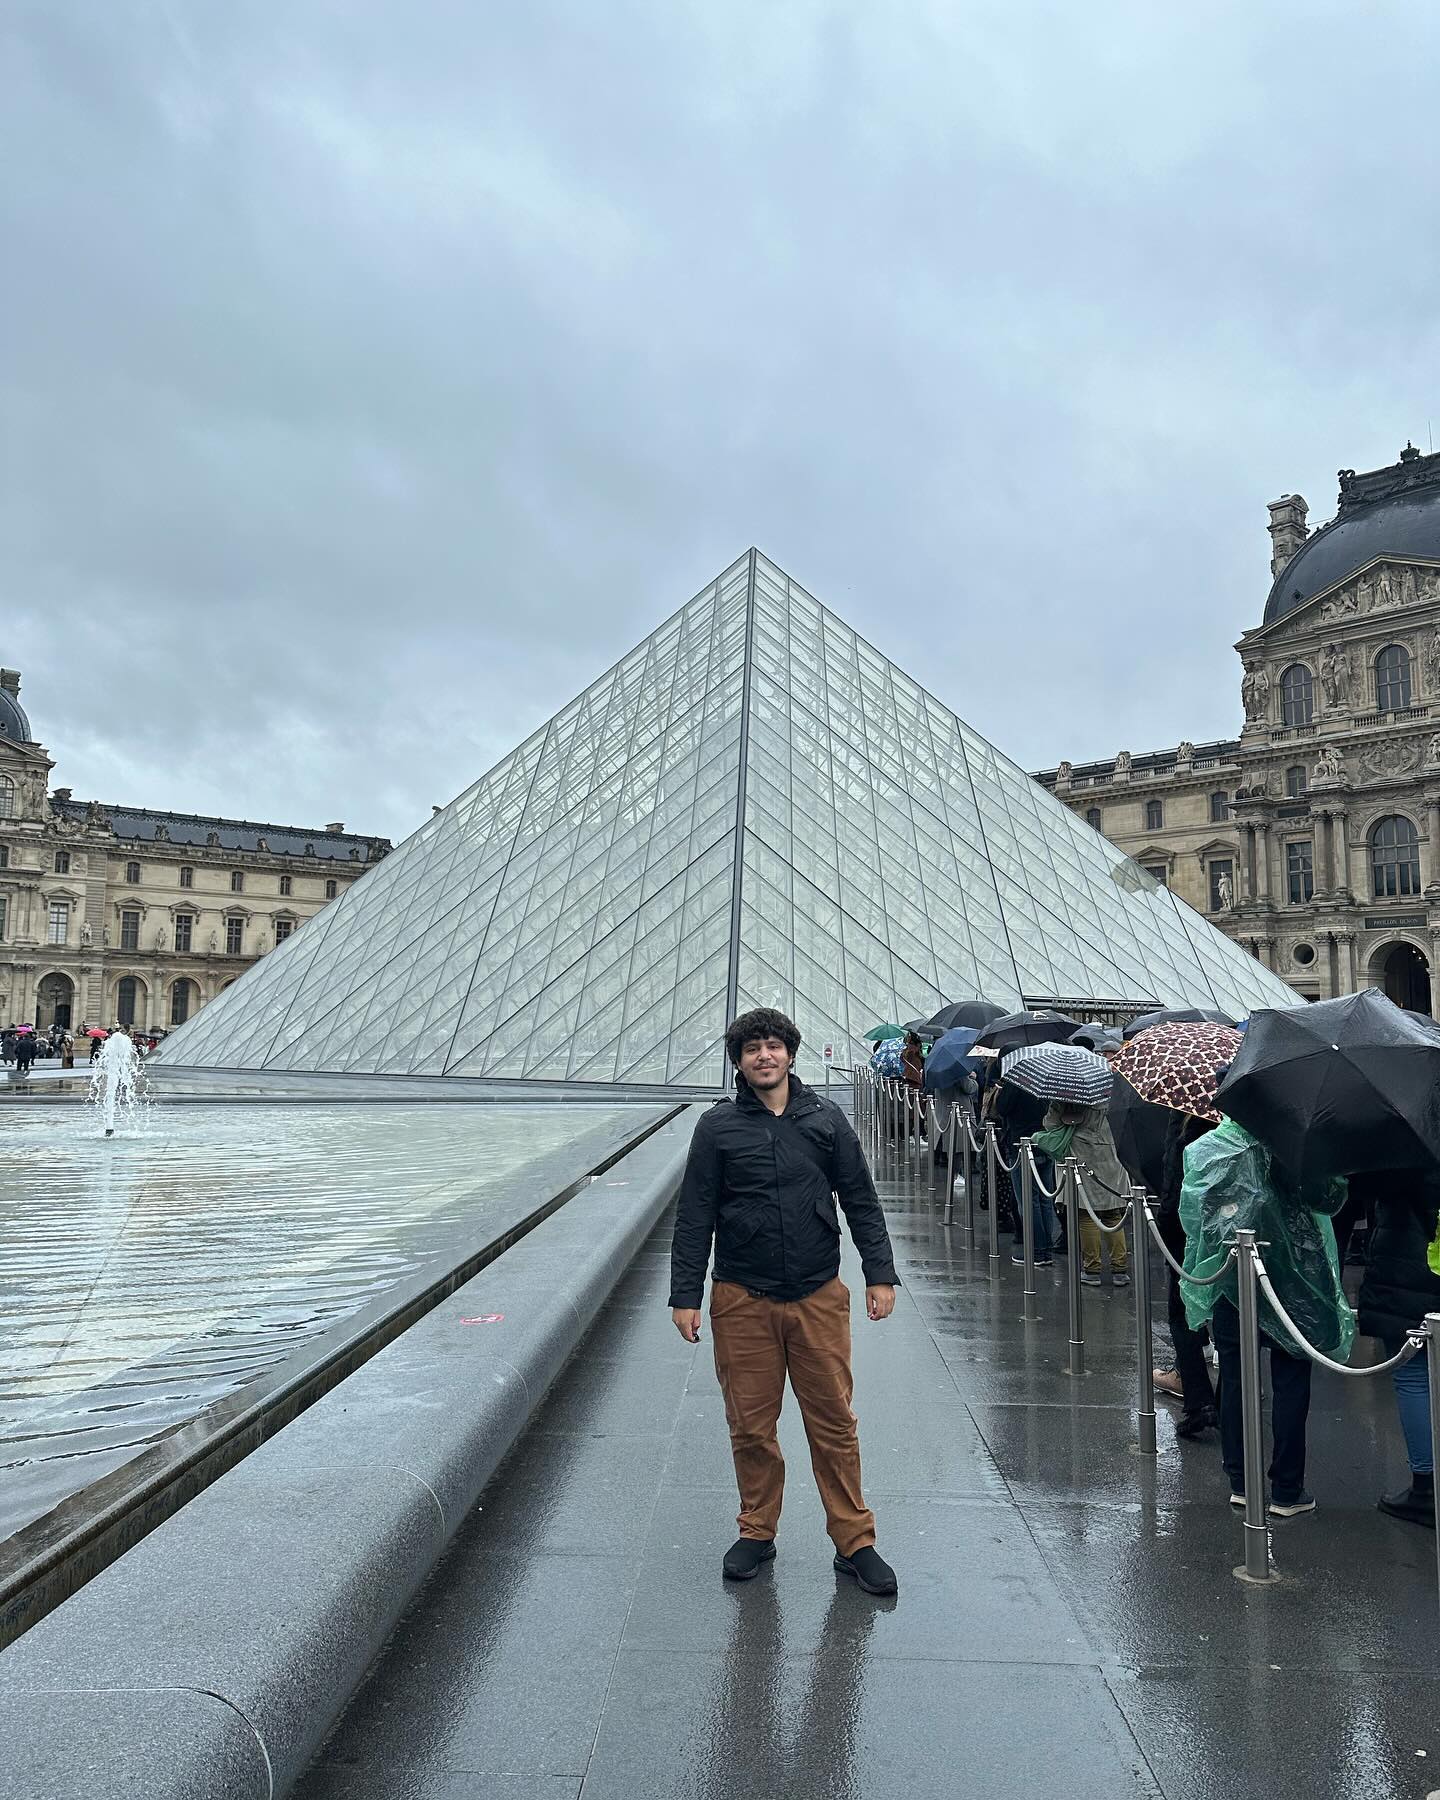 Some days in Paris, so many tourist spots